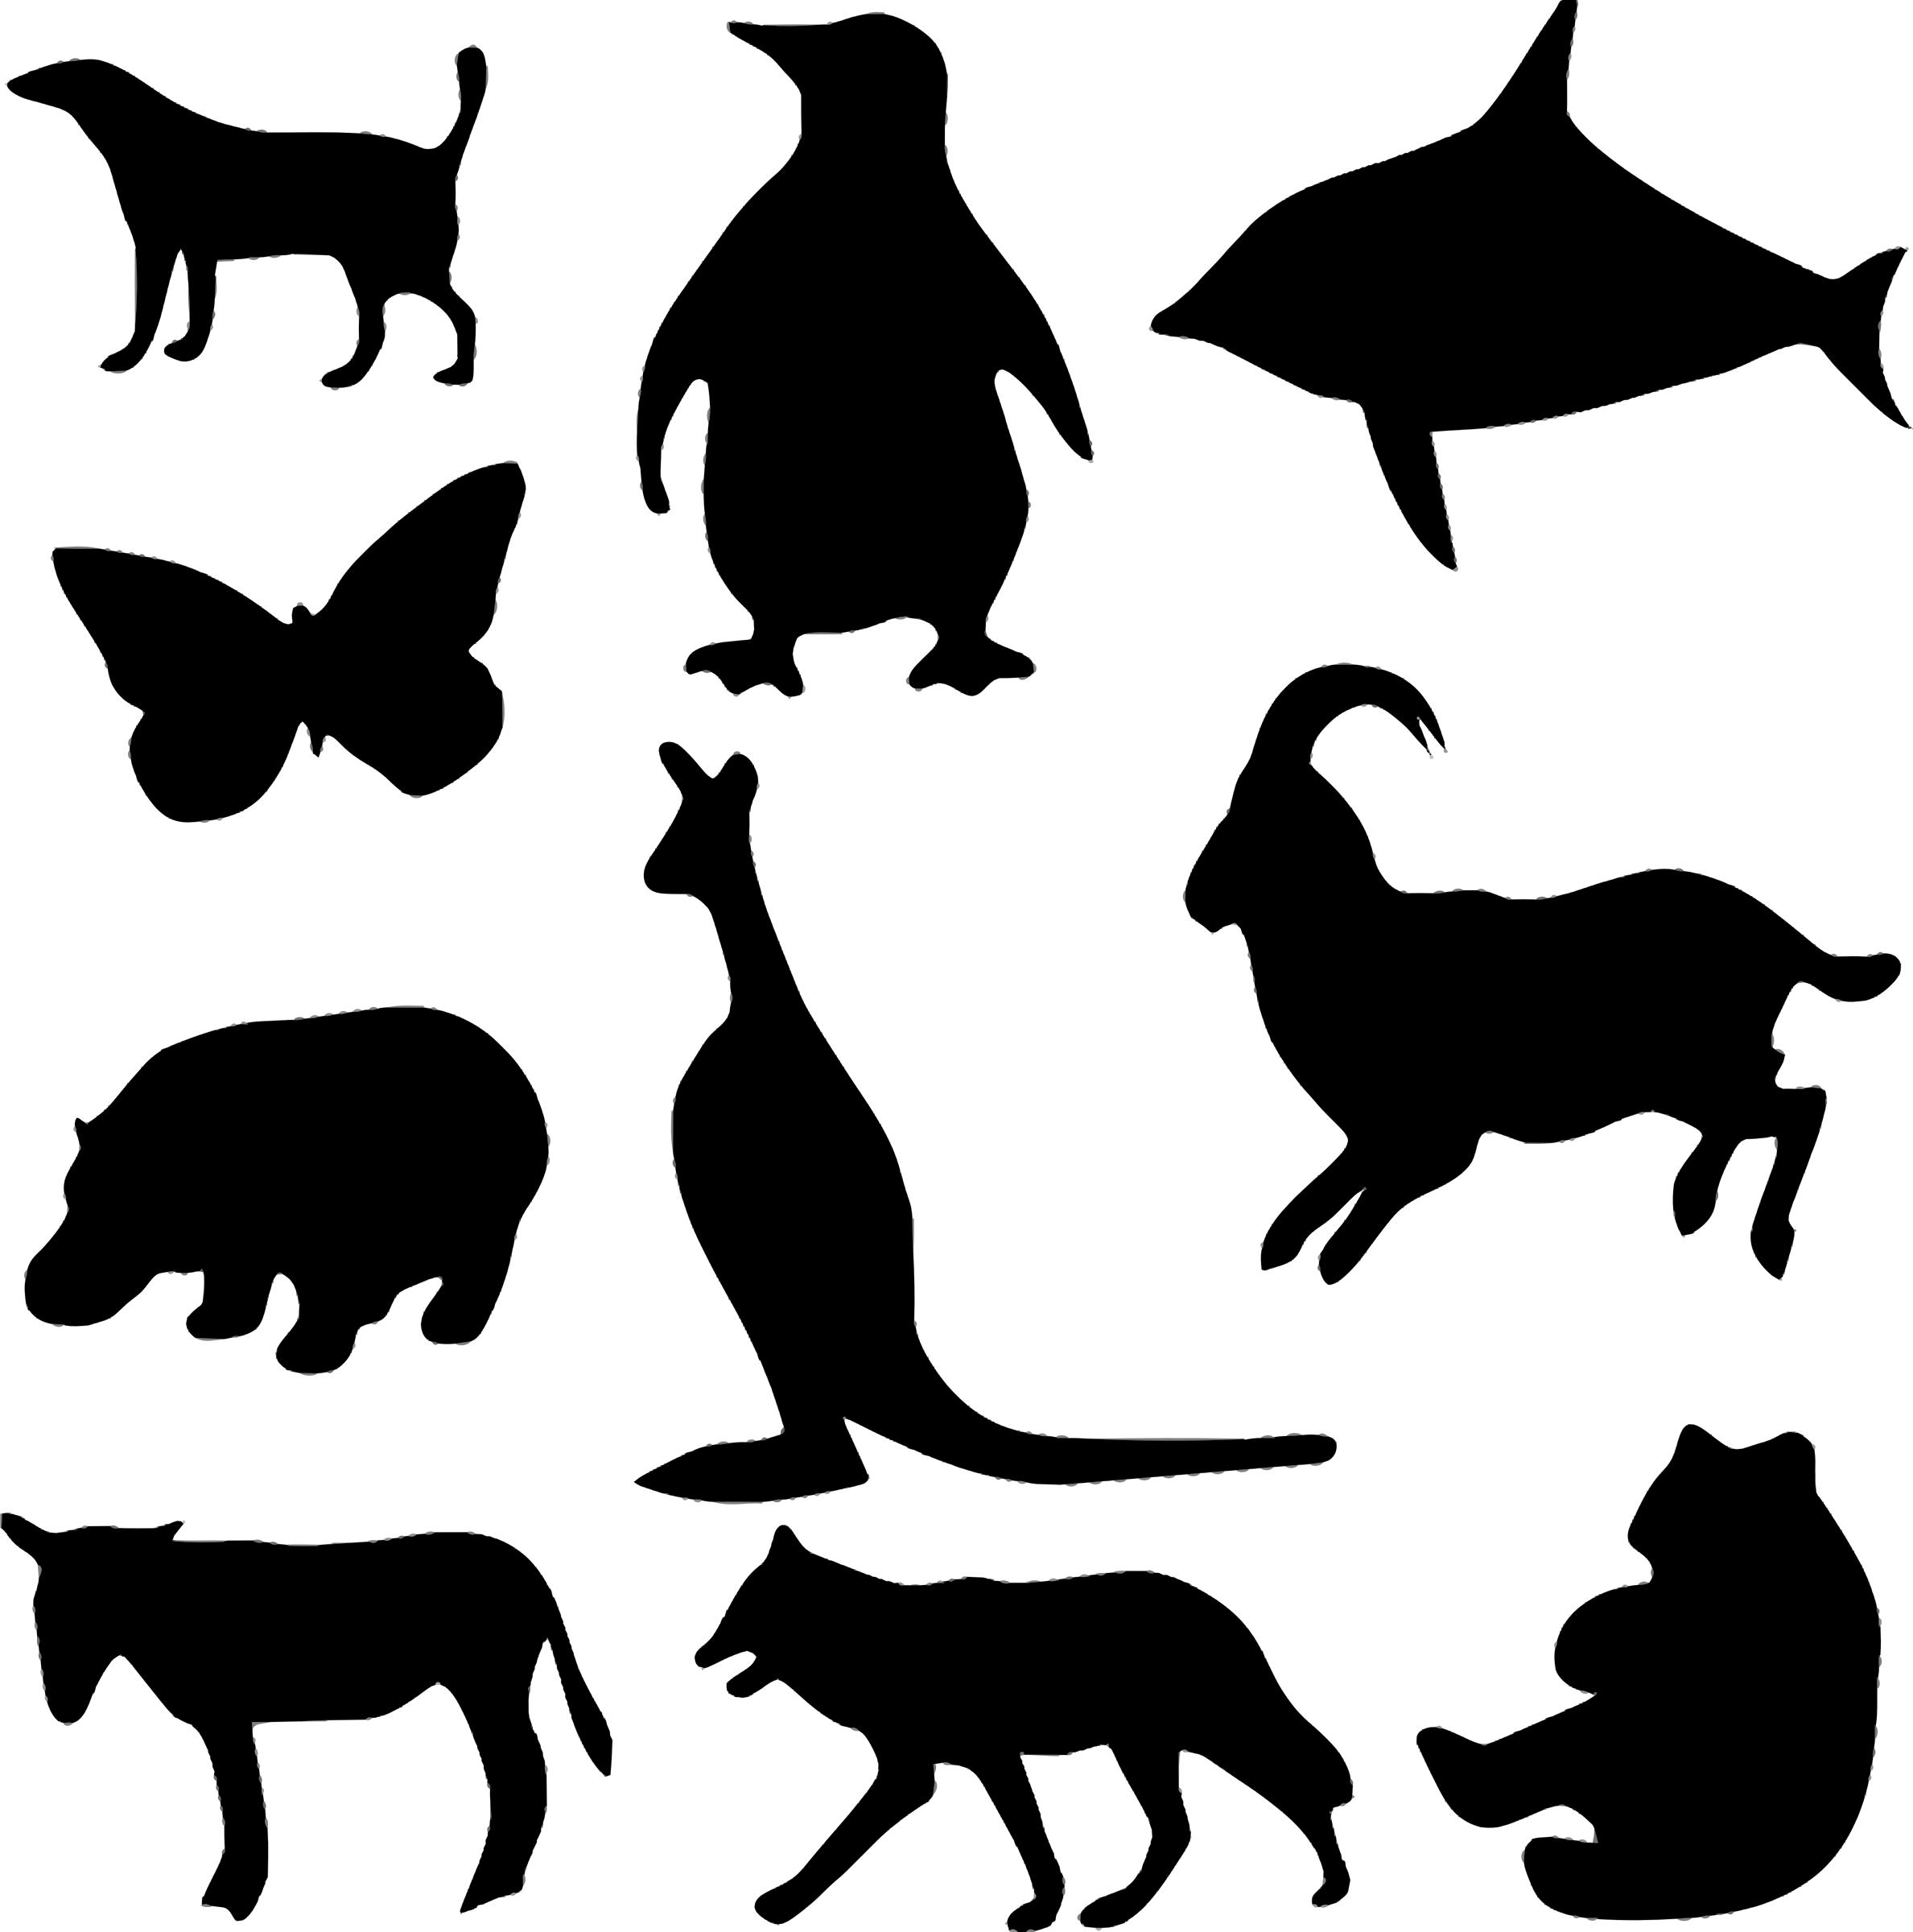 Animal silhouettes 1 png